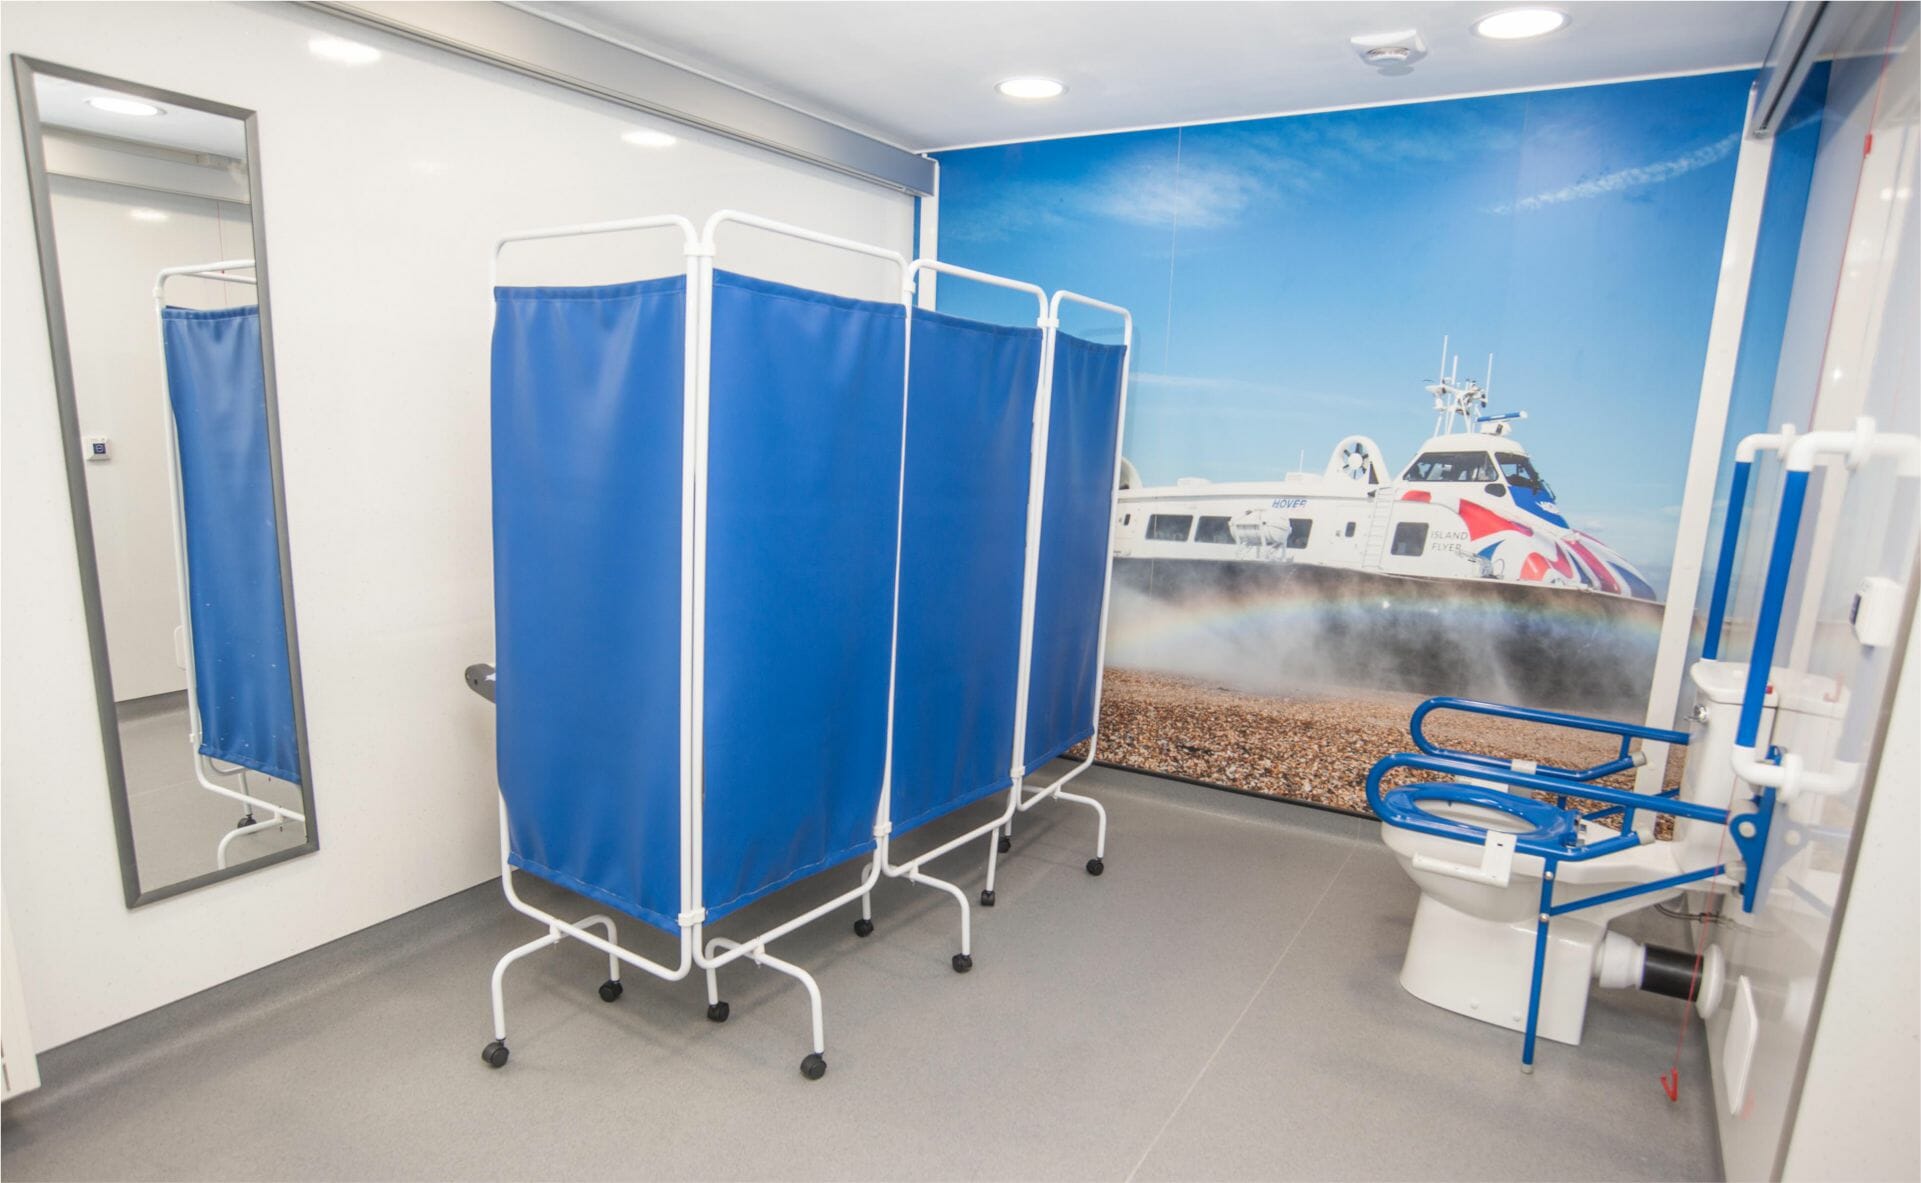 Newly Adapted Changing Places at Hovertravel